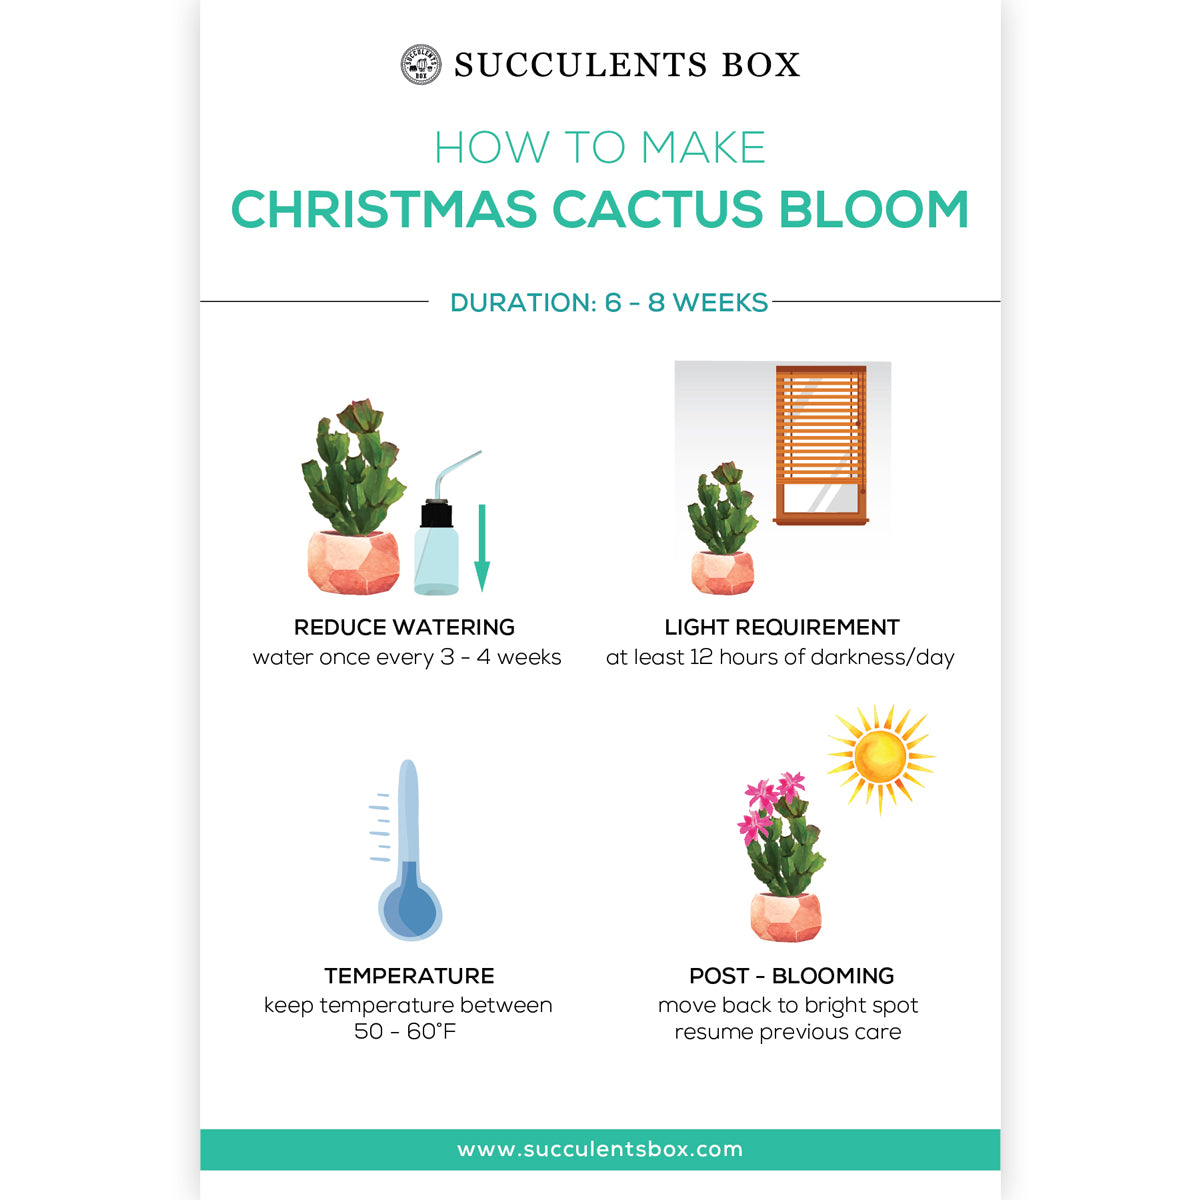 How to Make Christmas Cactus Bloom, Christmas Cactus Care Card for sale, How to care for Christmas Cactus Succulent